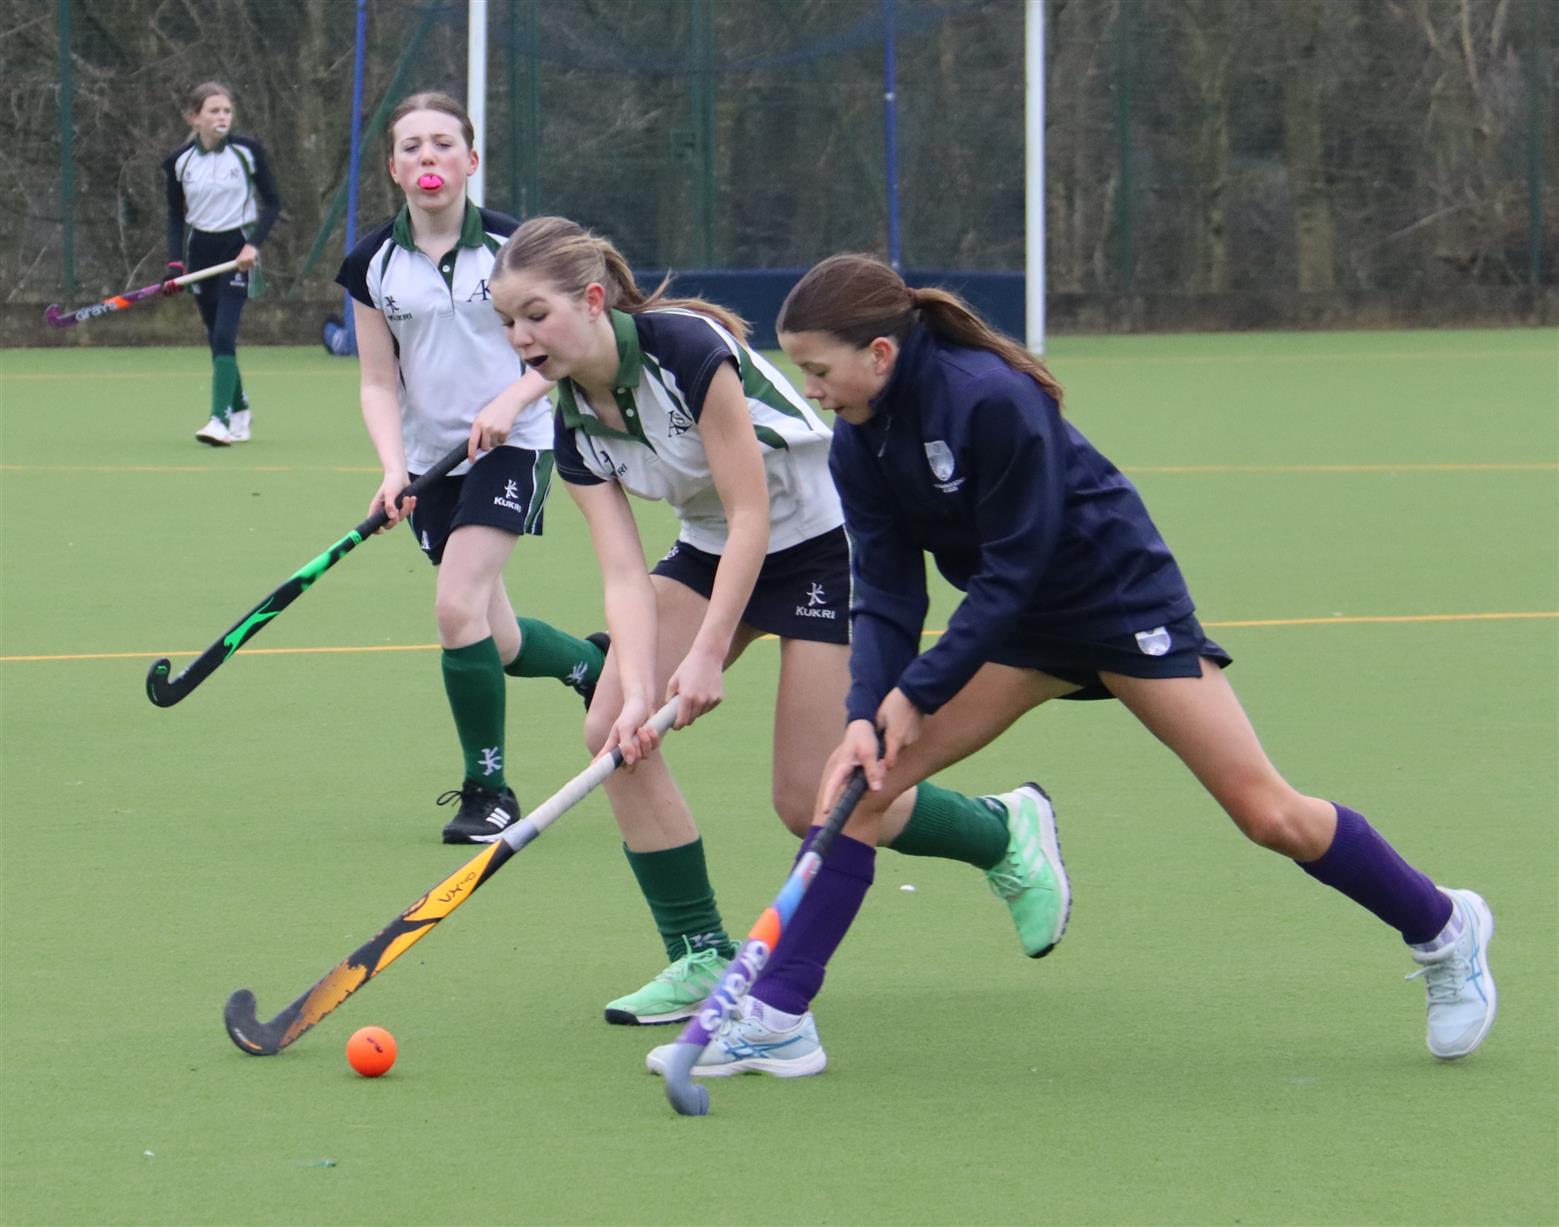 Great morning of competitive hockey for 6 teams against The Grammar School at Leeds